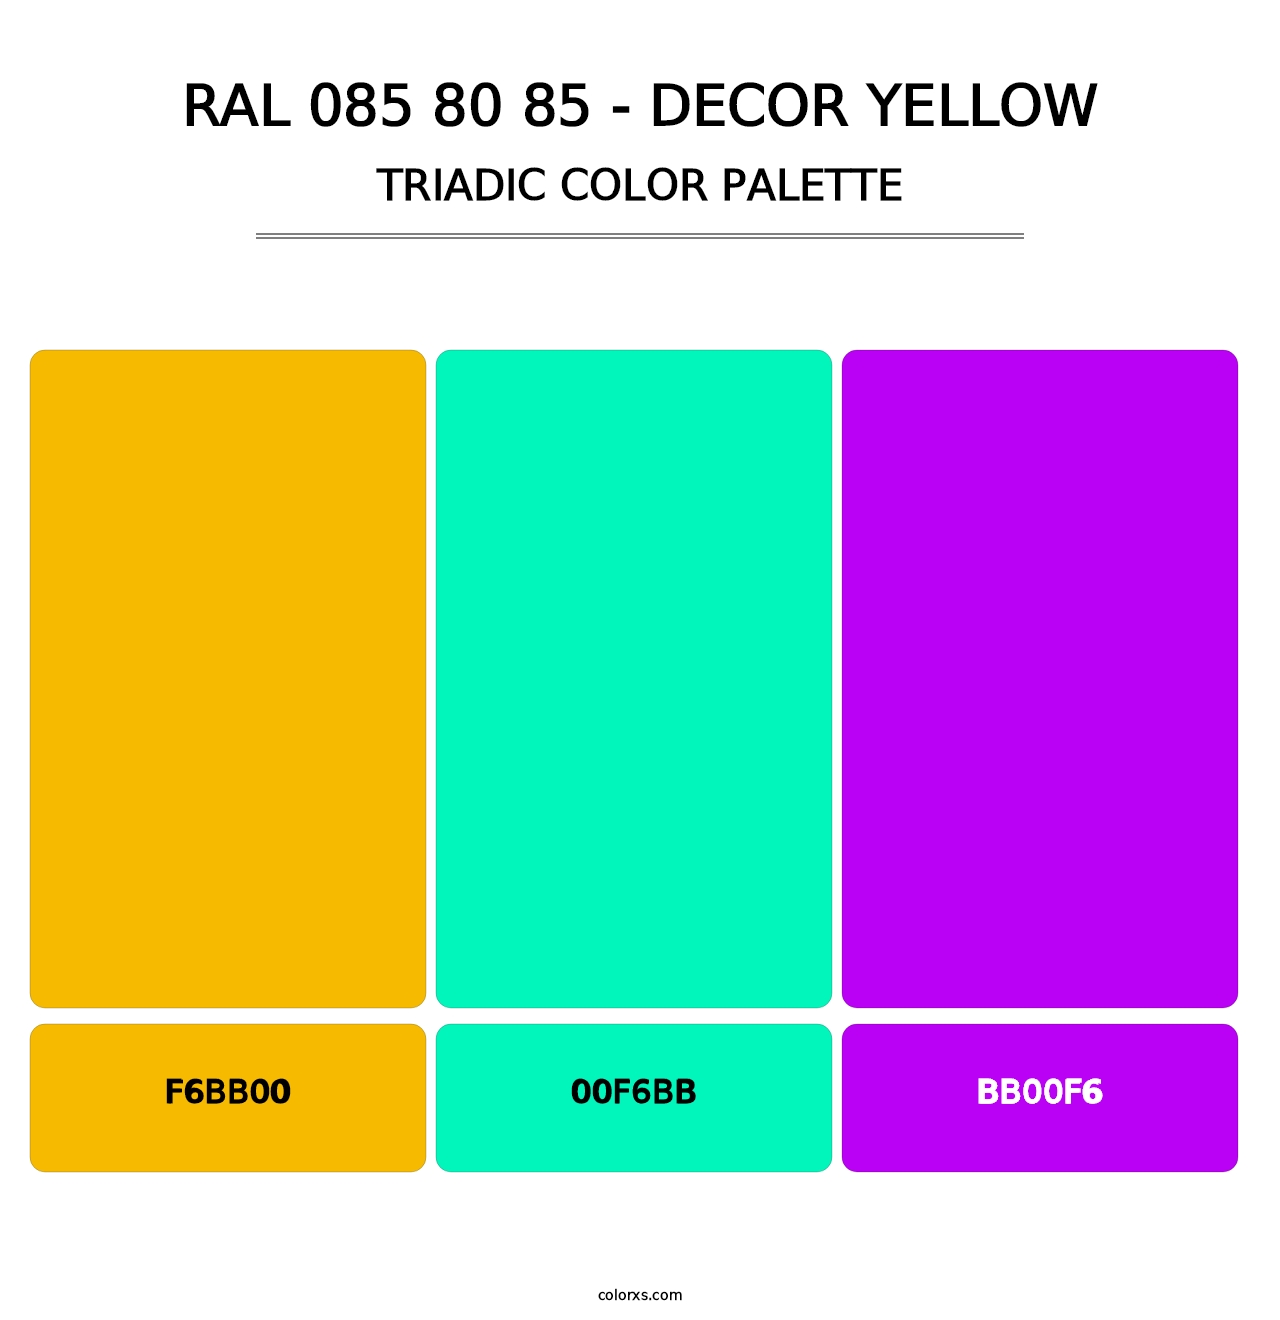 RAL 085 80 85 - Decor Yellow - Triadic Color Palette